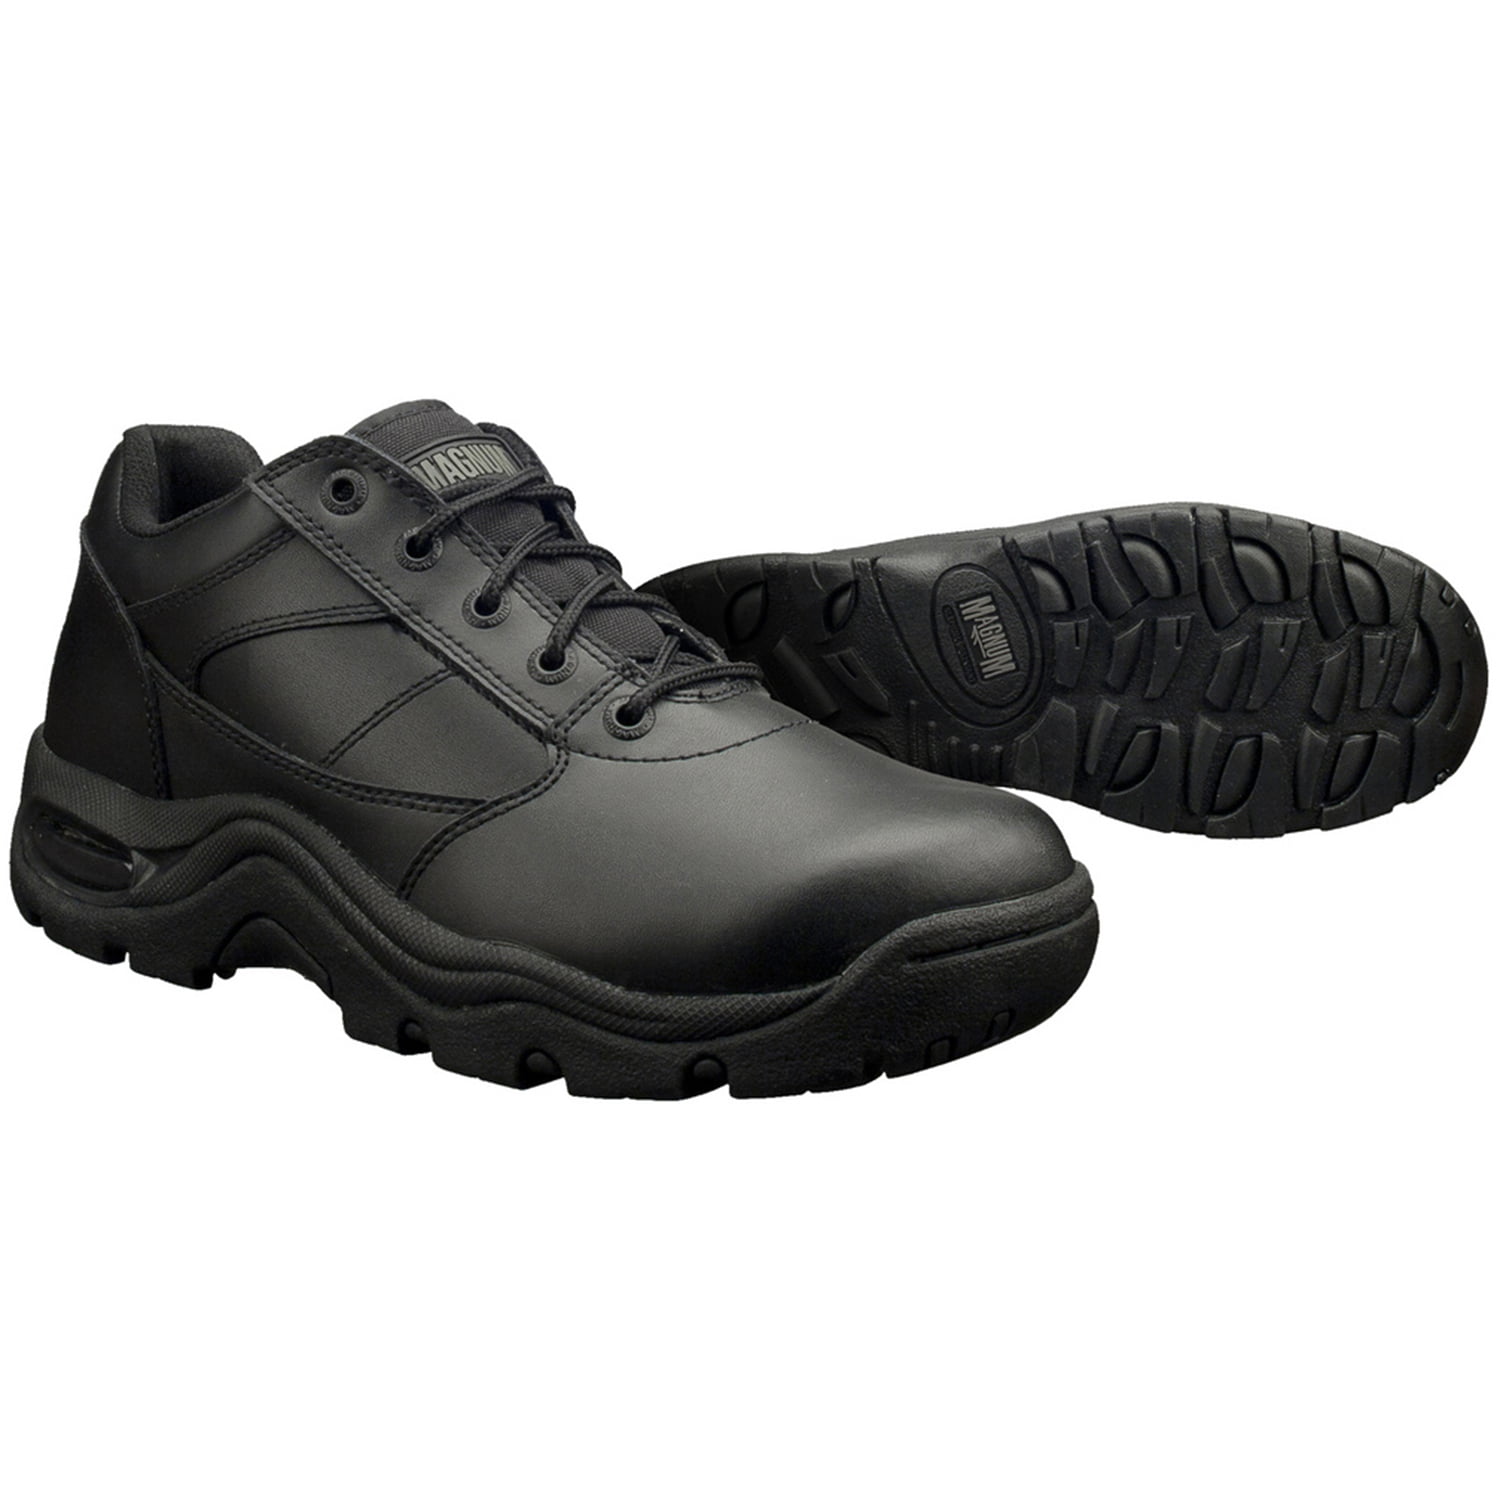 all black work shoes